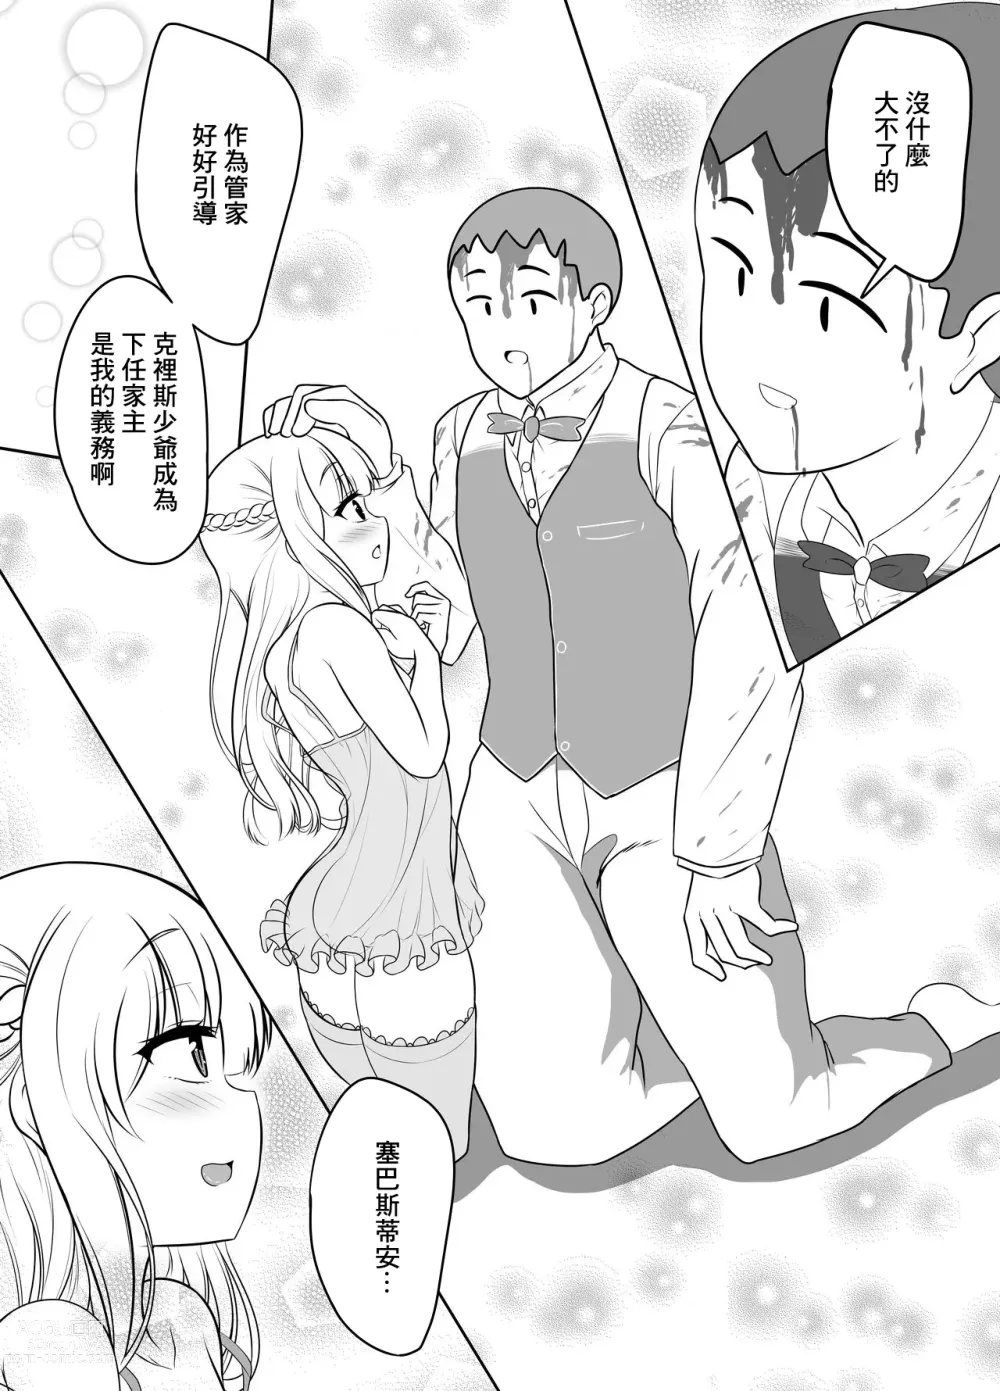 Page 22 of doujinshi Noble Asshole